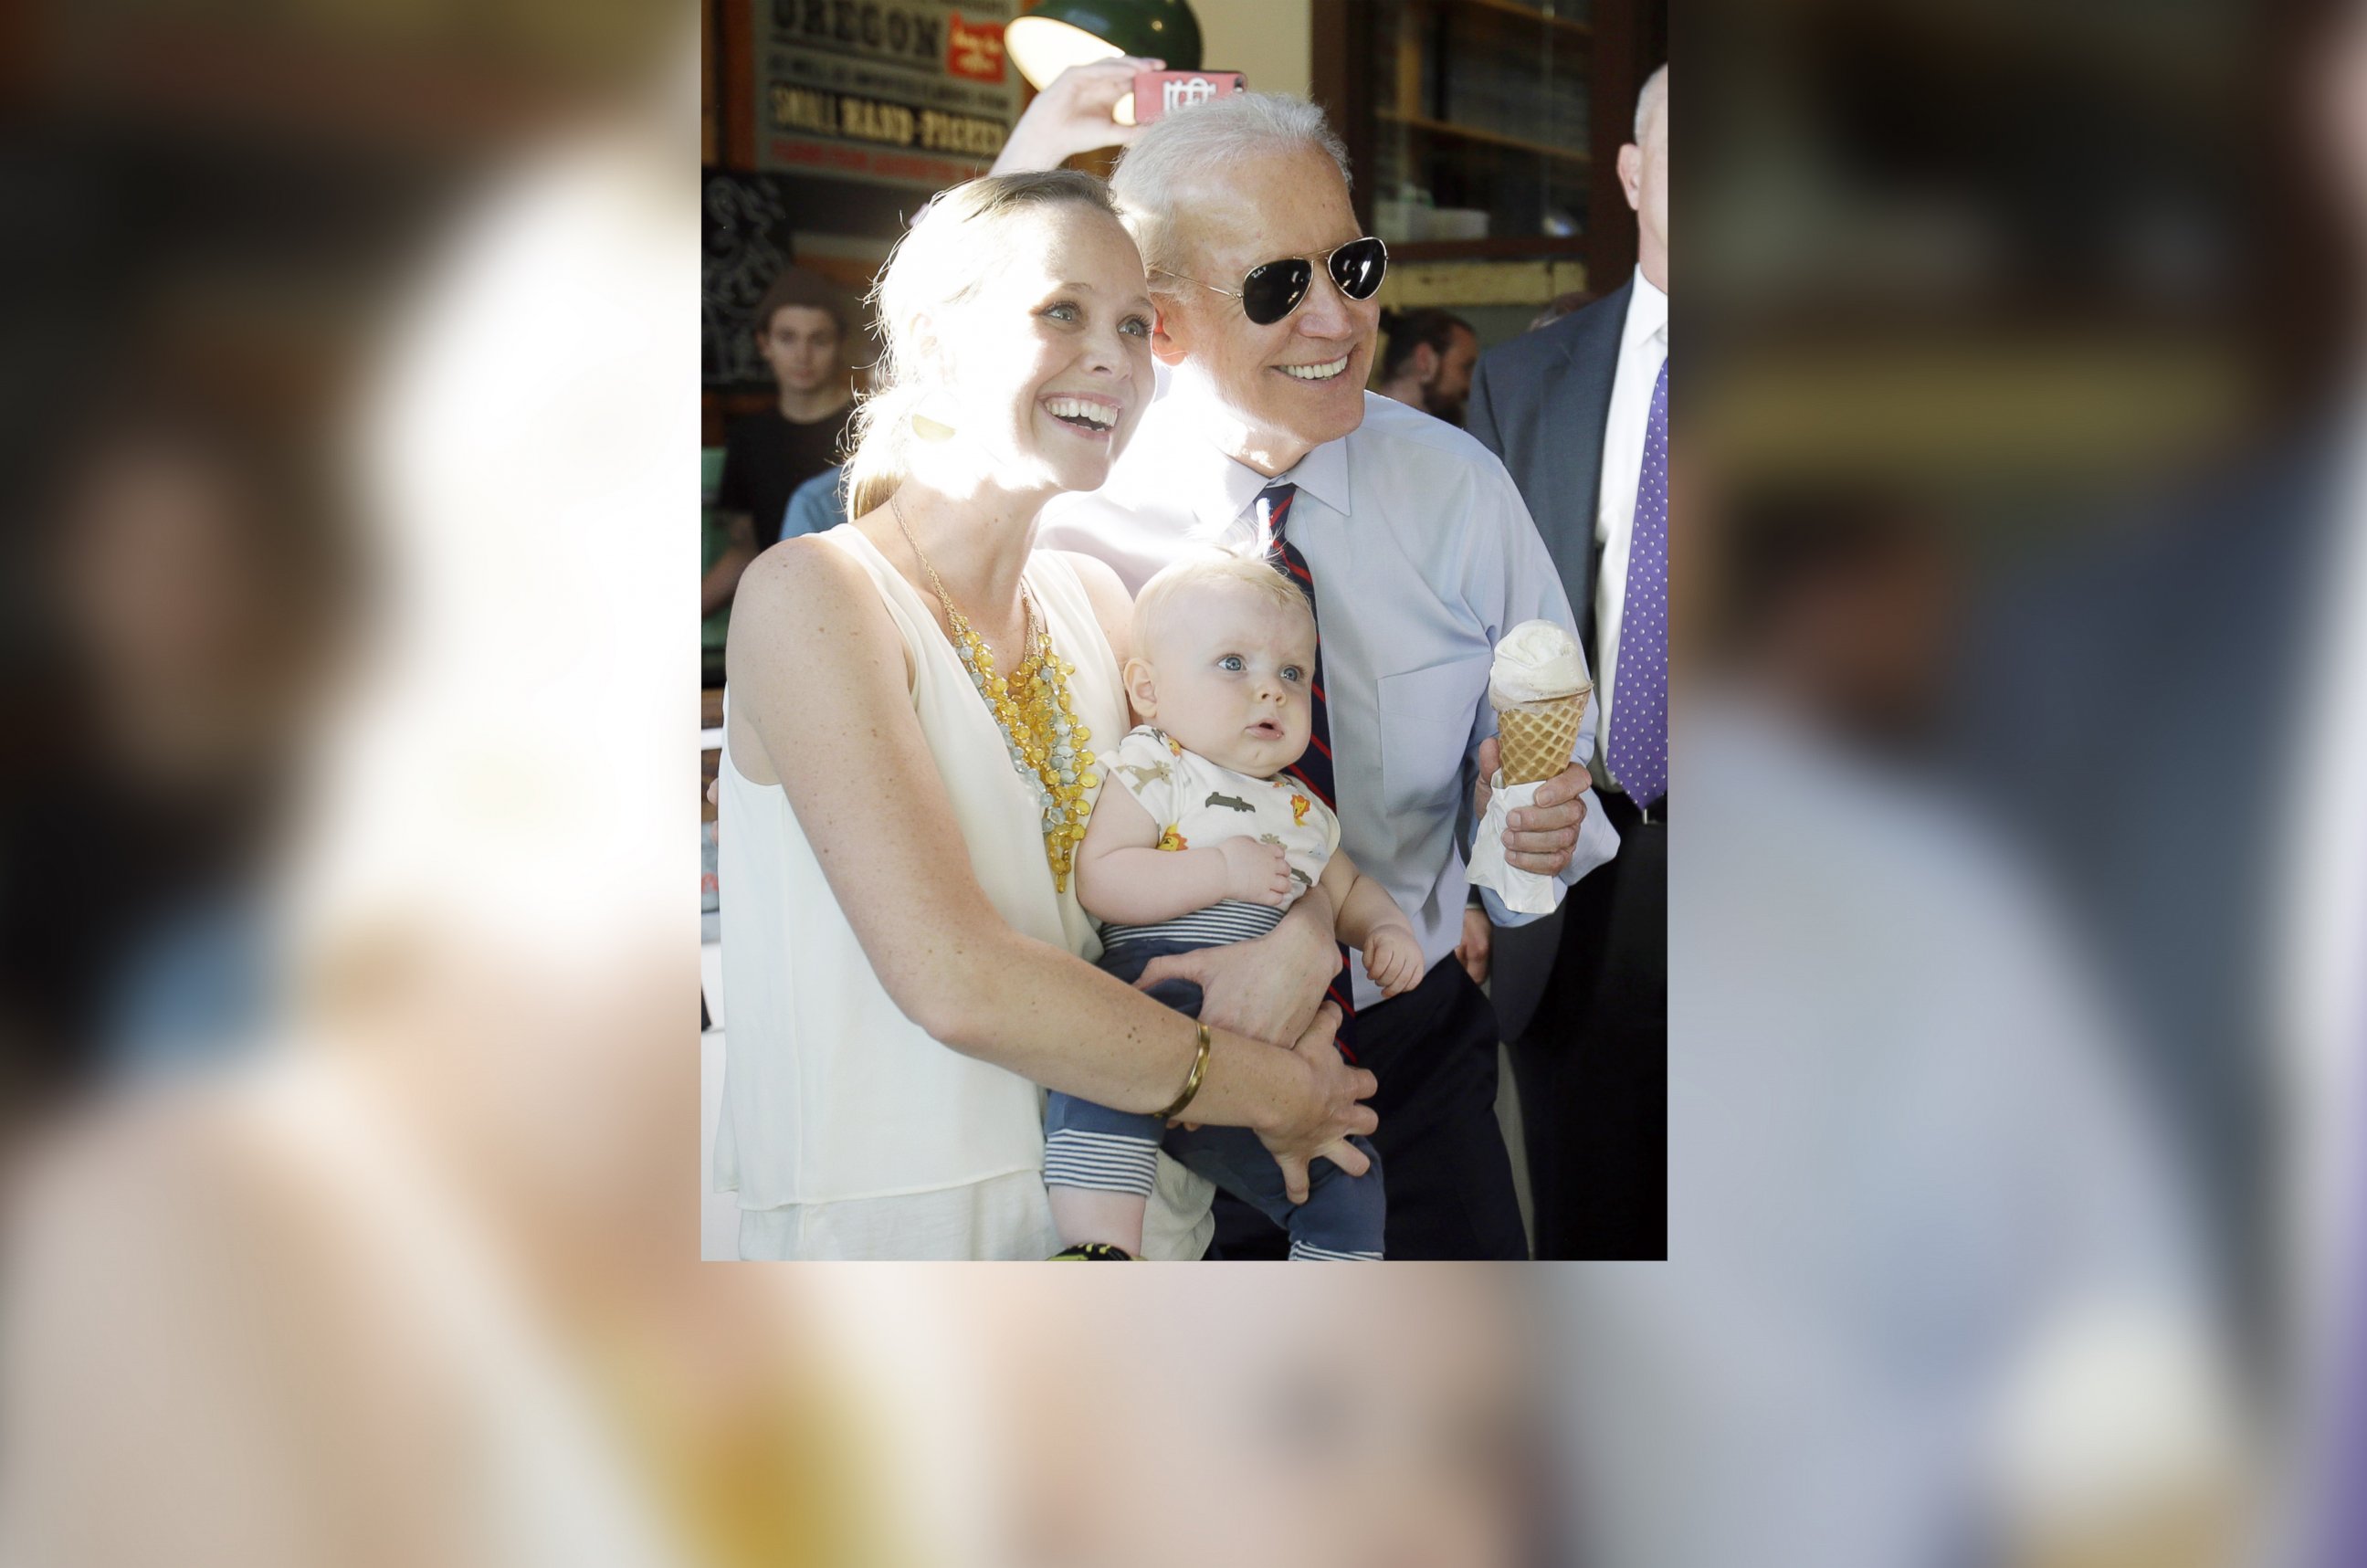 PHOTO: Vice President Joe Biden holds an ice cream cone as he poses for a photo with Hope Lobkowizc and her son, Owen, at an ice cream parlor after a campaign rally in Portland, Ore., Oct. 8, 2014.